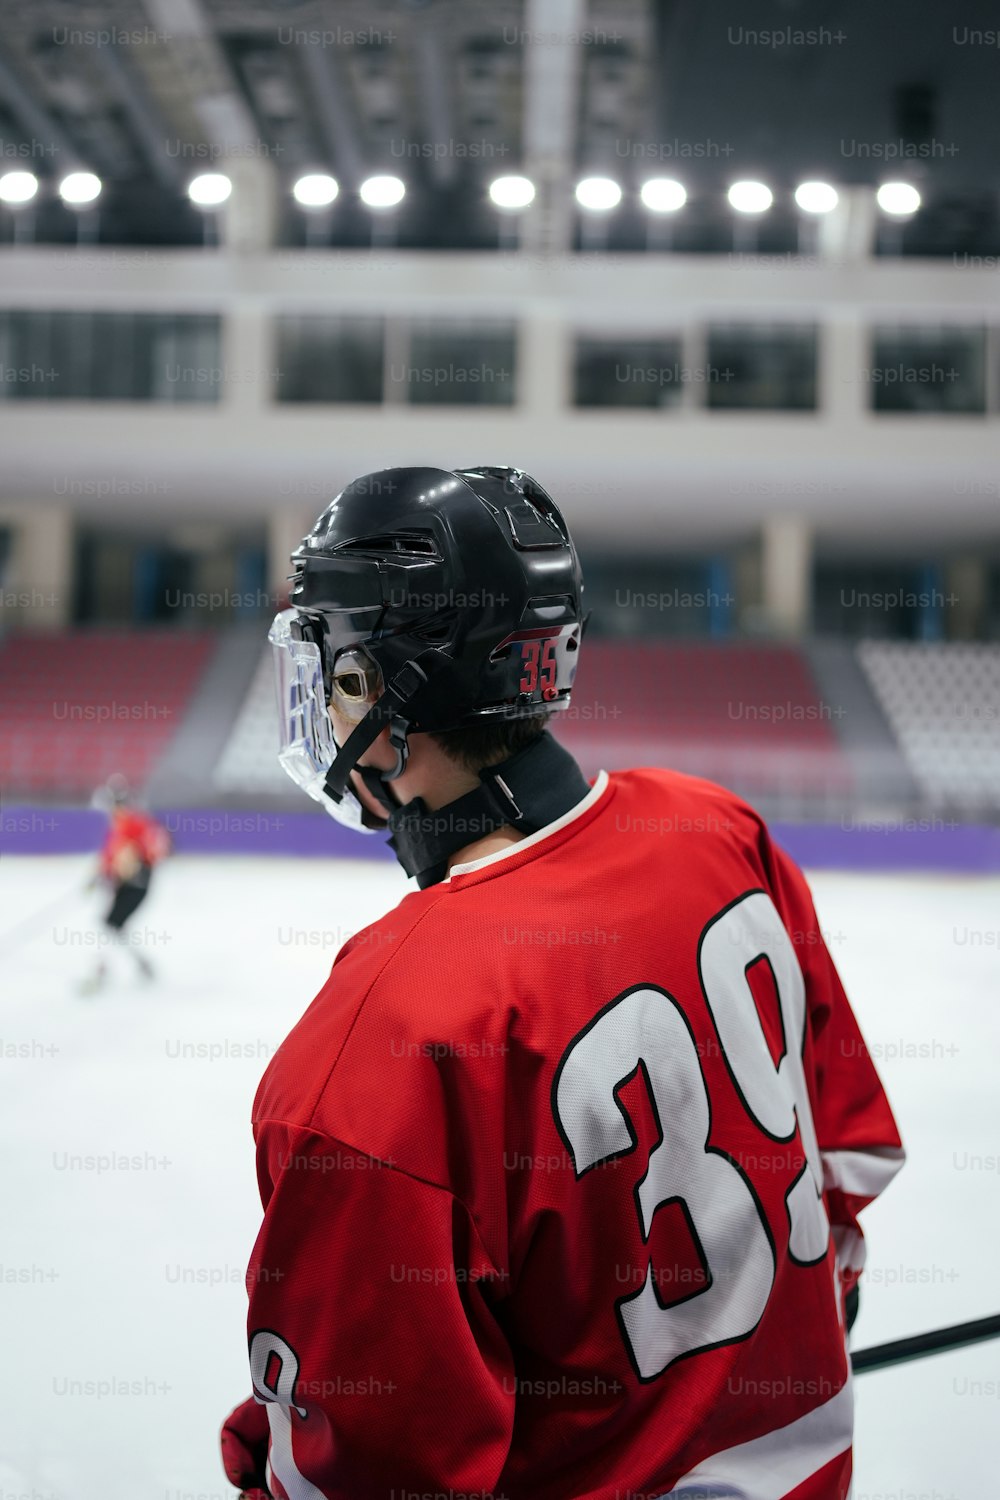 a hockey player wearing a red jersey and helmet